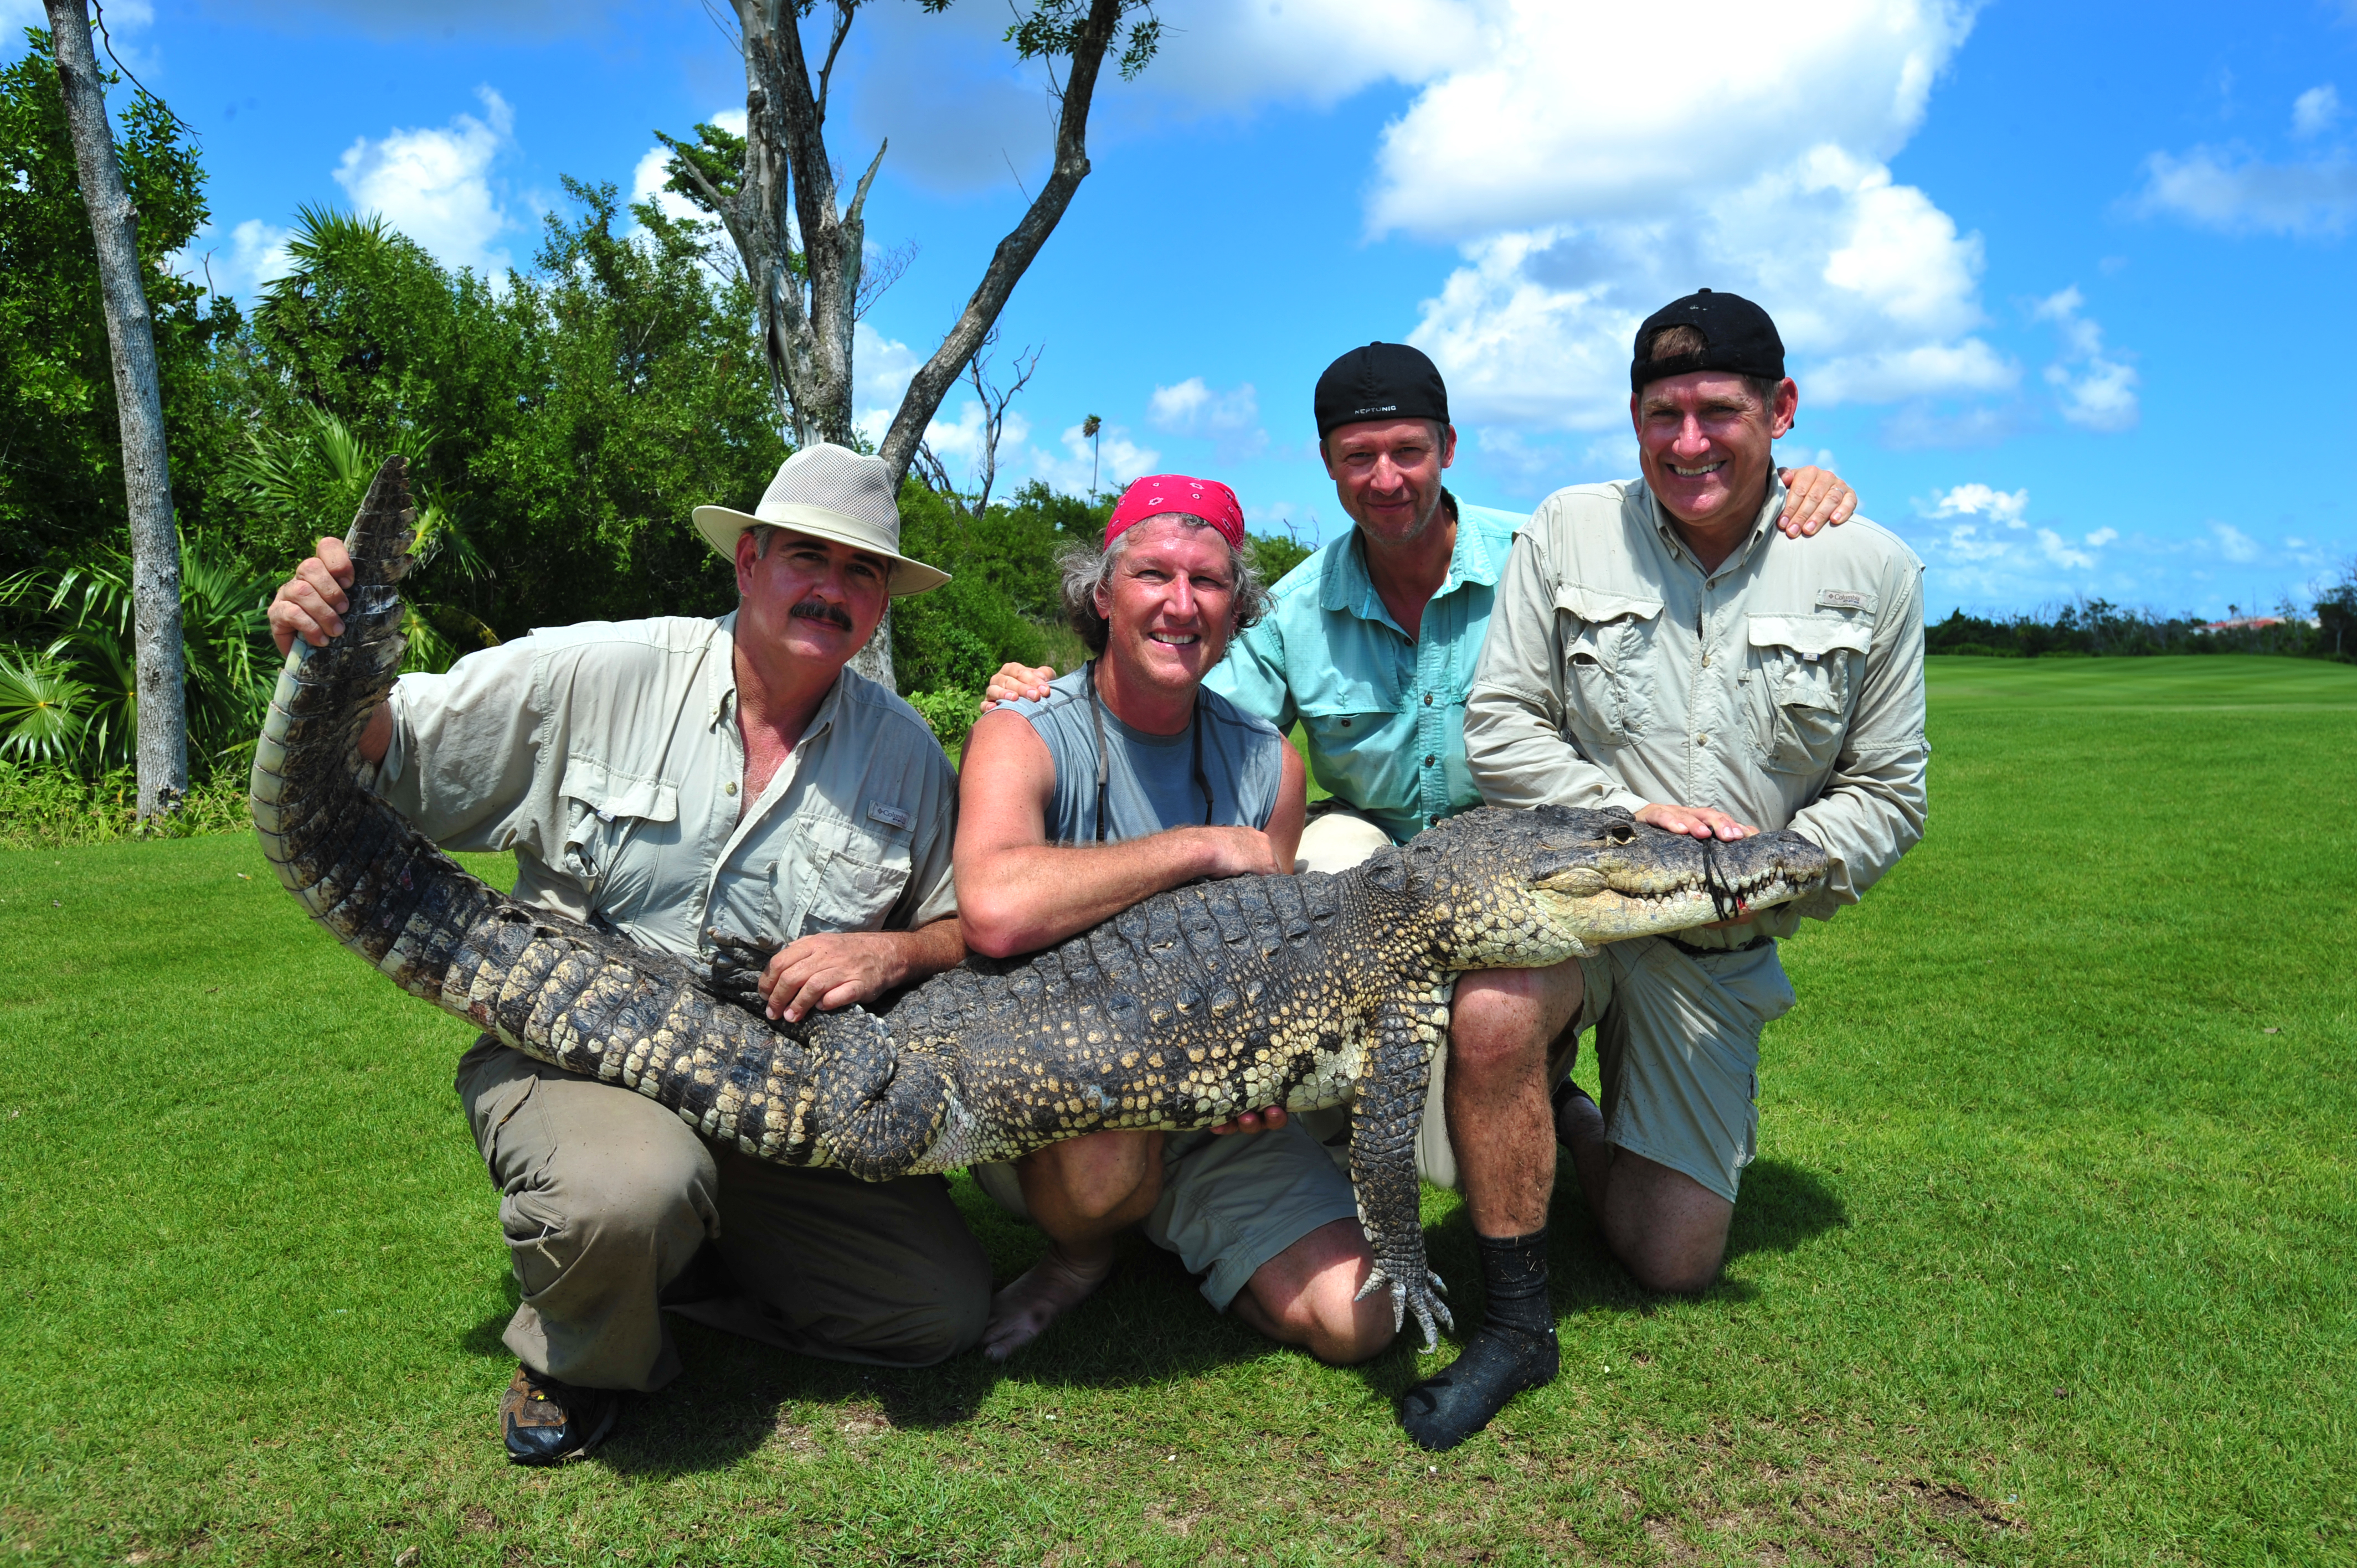 Marco Lazcano-Barrero, R.C., Simon Boyce & Brady Barr w/gator on location in Cancun during the production of National Geographic's 